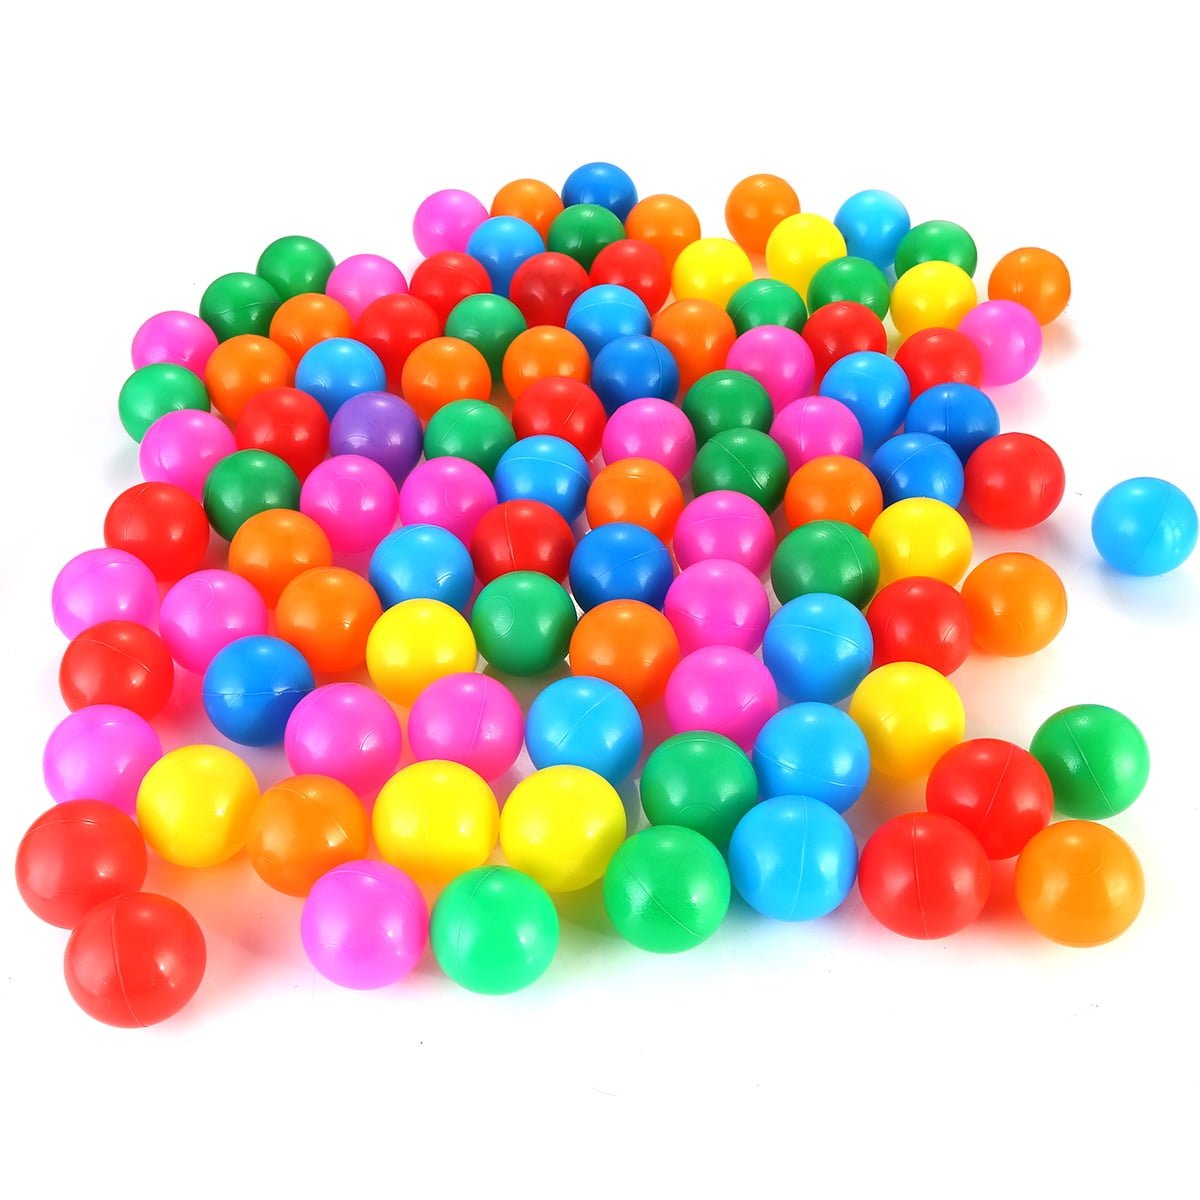 10pc Colorful Soft Plastic Ocean Ball 55mm Safty Secure Baby Kid Pit Toys SwNWXH 